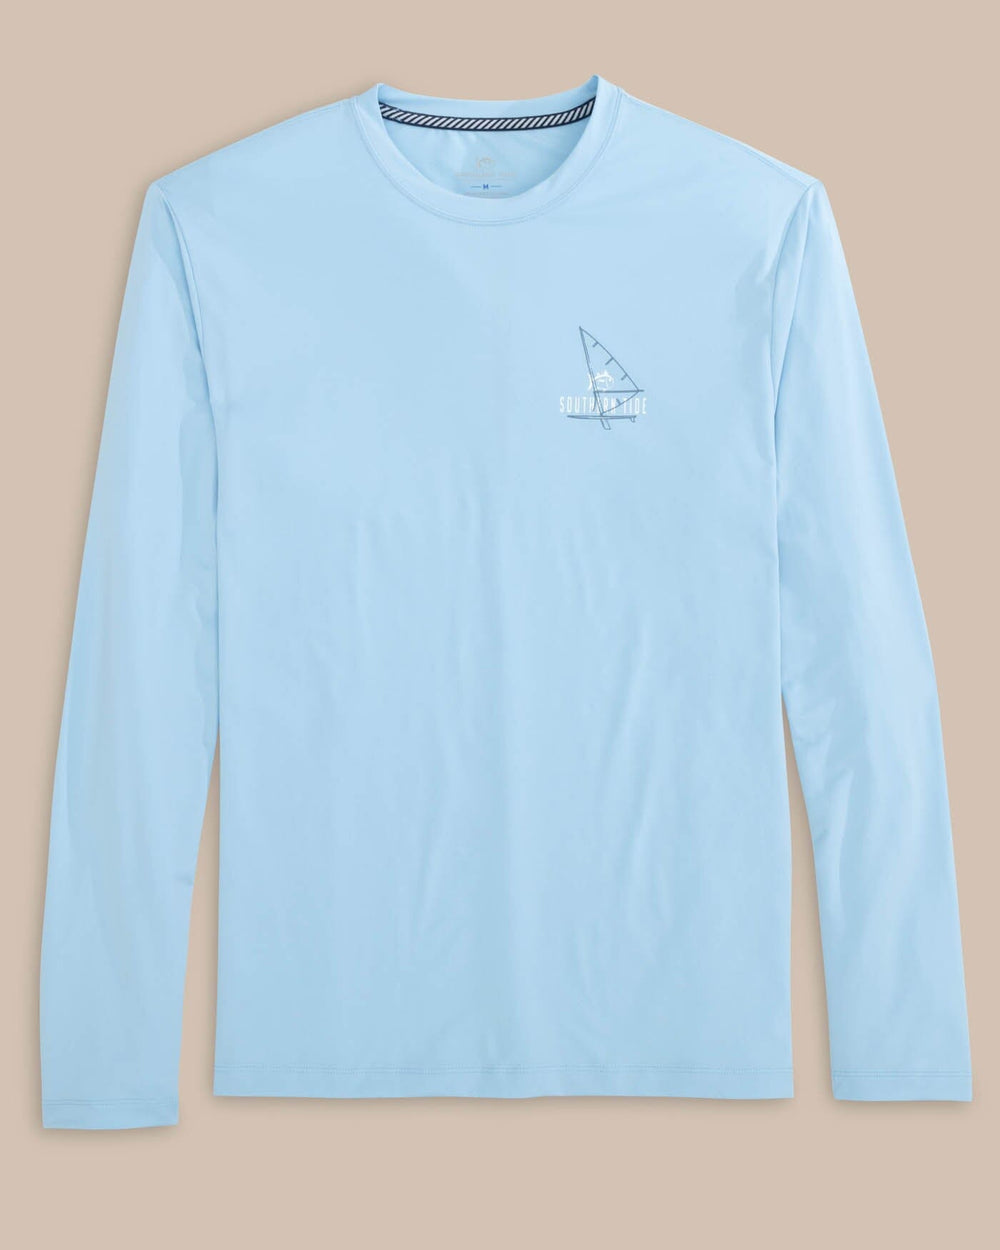 Affordable Wholesale windsurfing shirts For Smooth Fishing